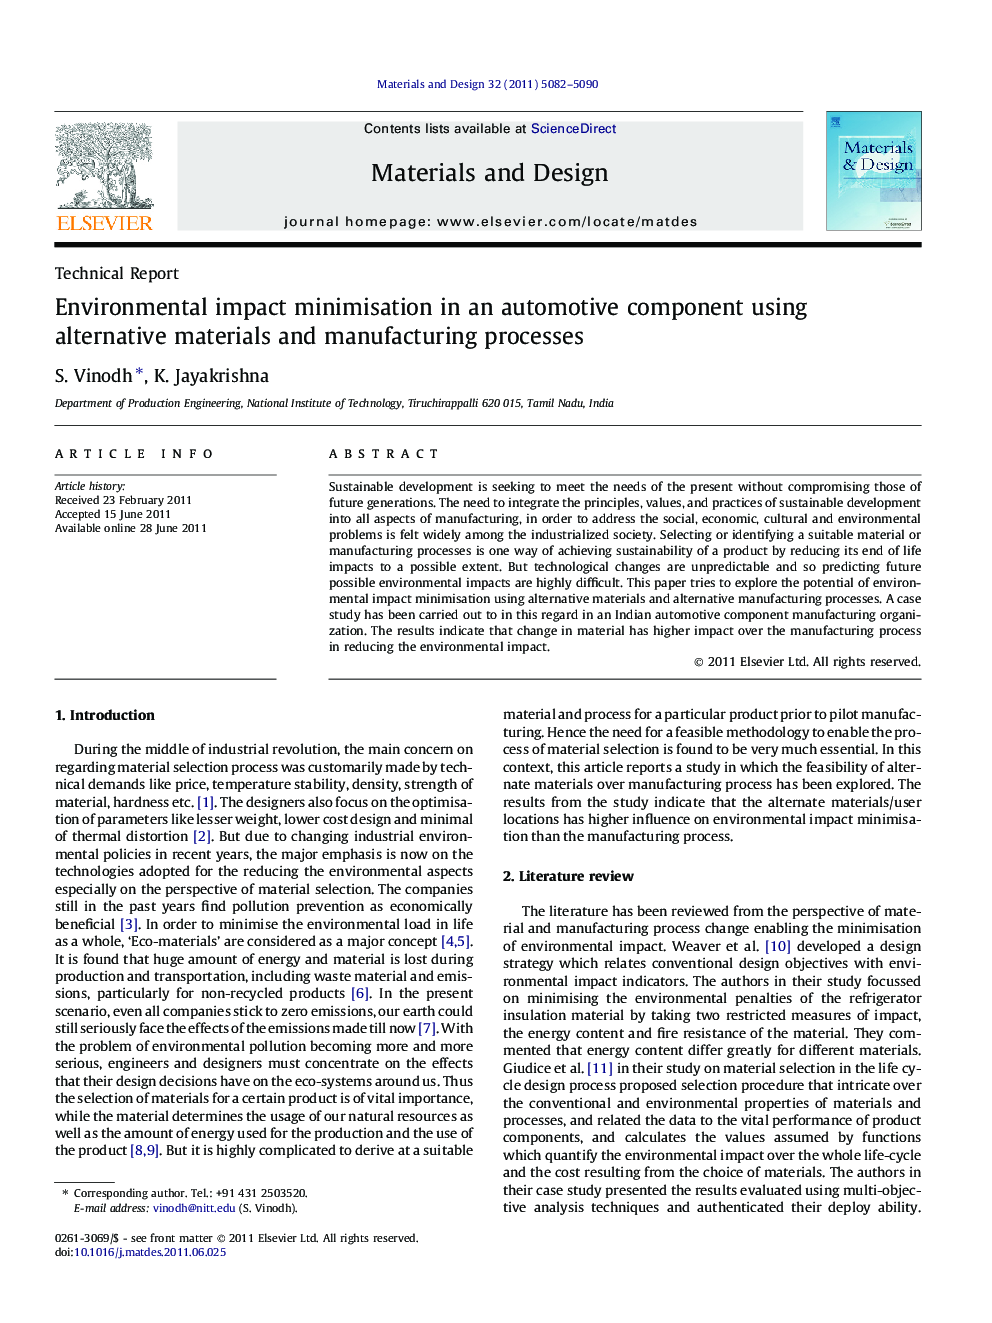 Environmental impact minimisation in an automotive component using alternative materials and manufacturing processes